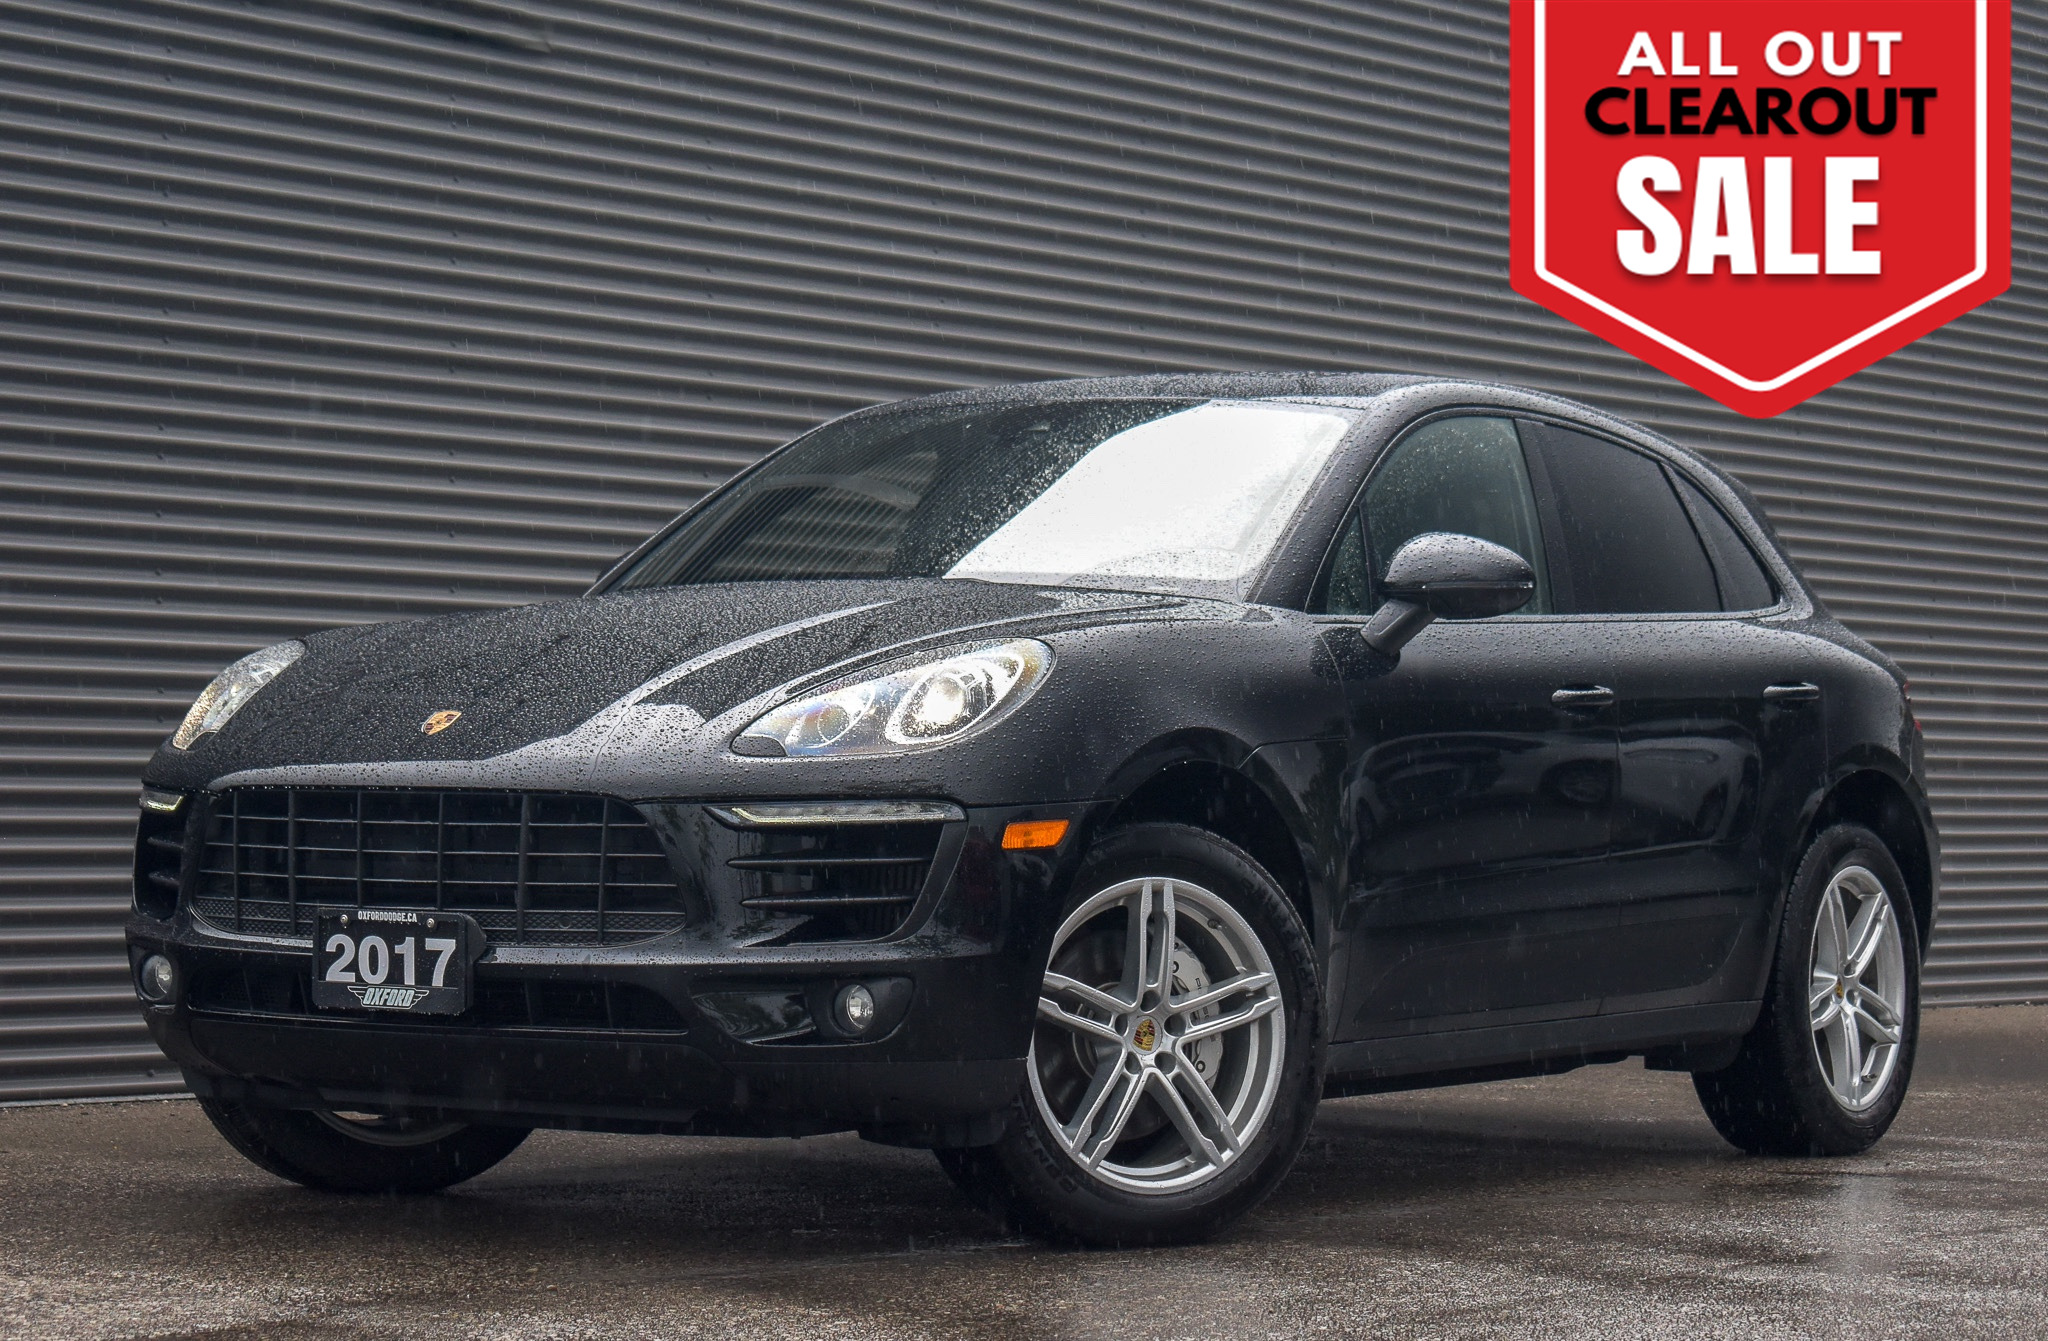 2017 Porsche Macan S No Accidents, Great Curb Appeal, Loaded